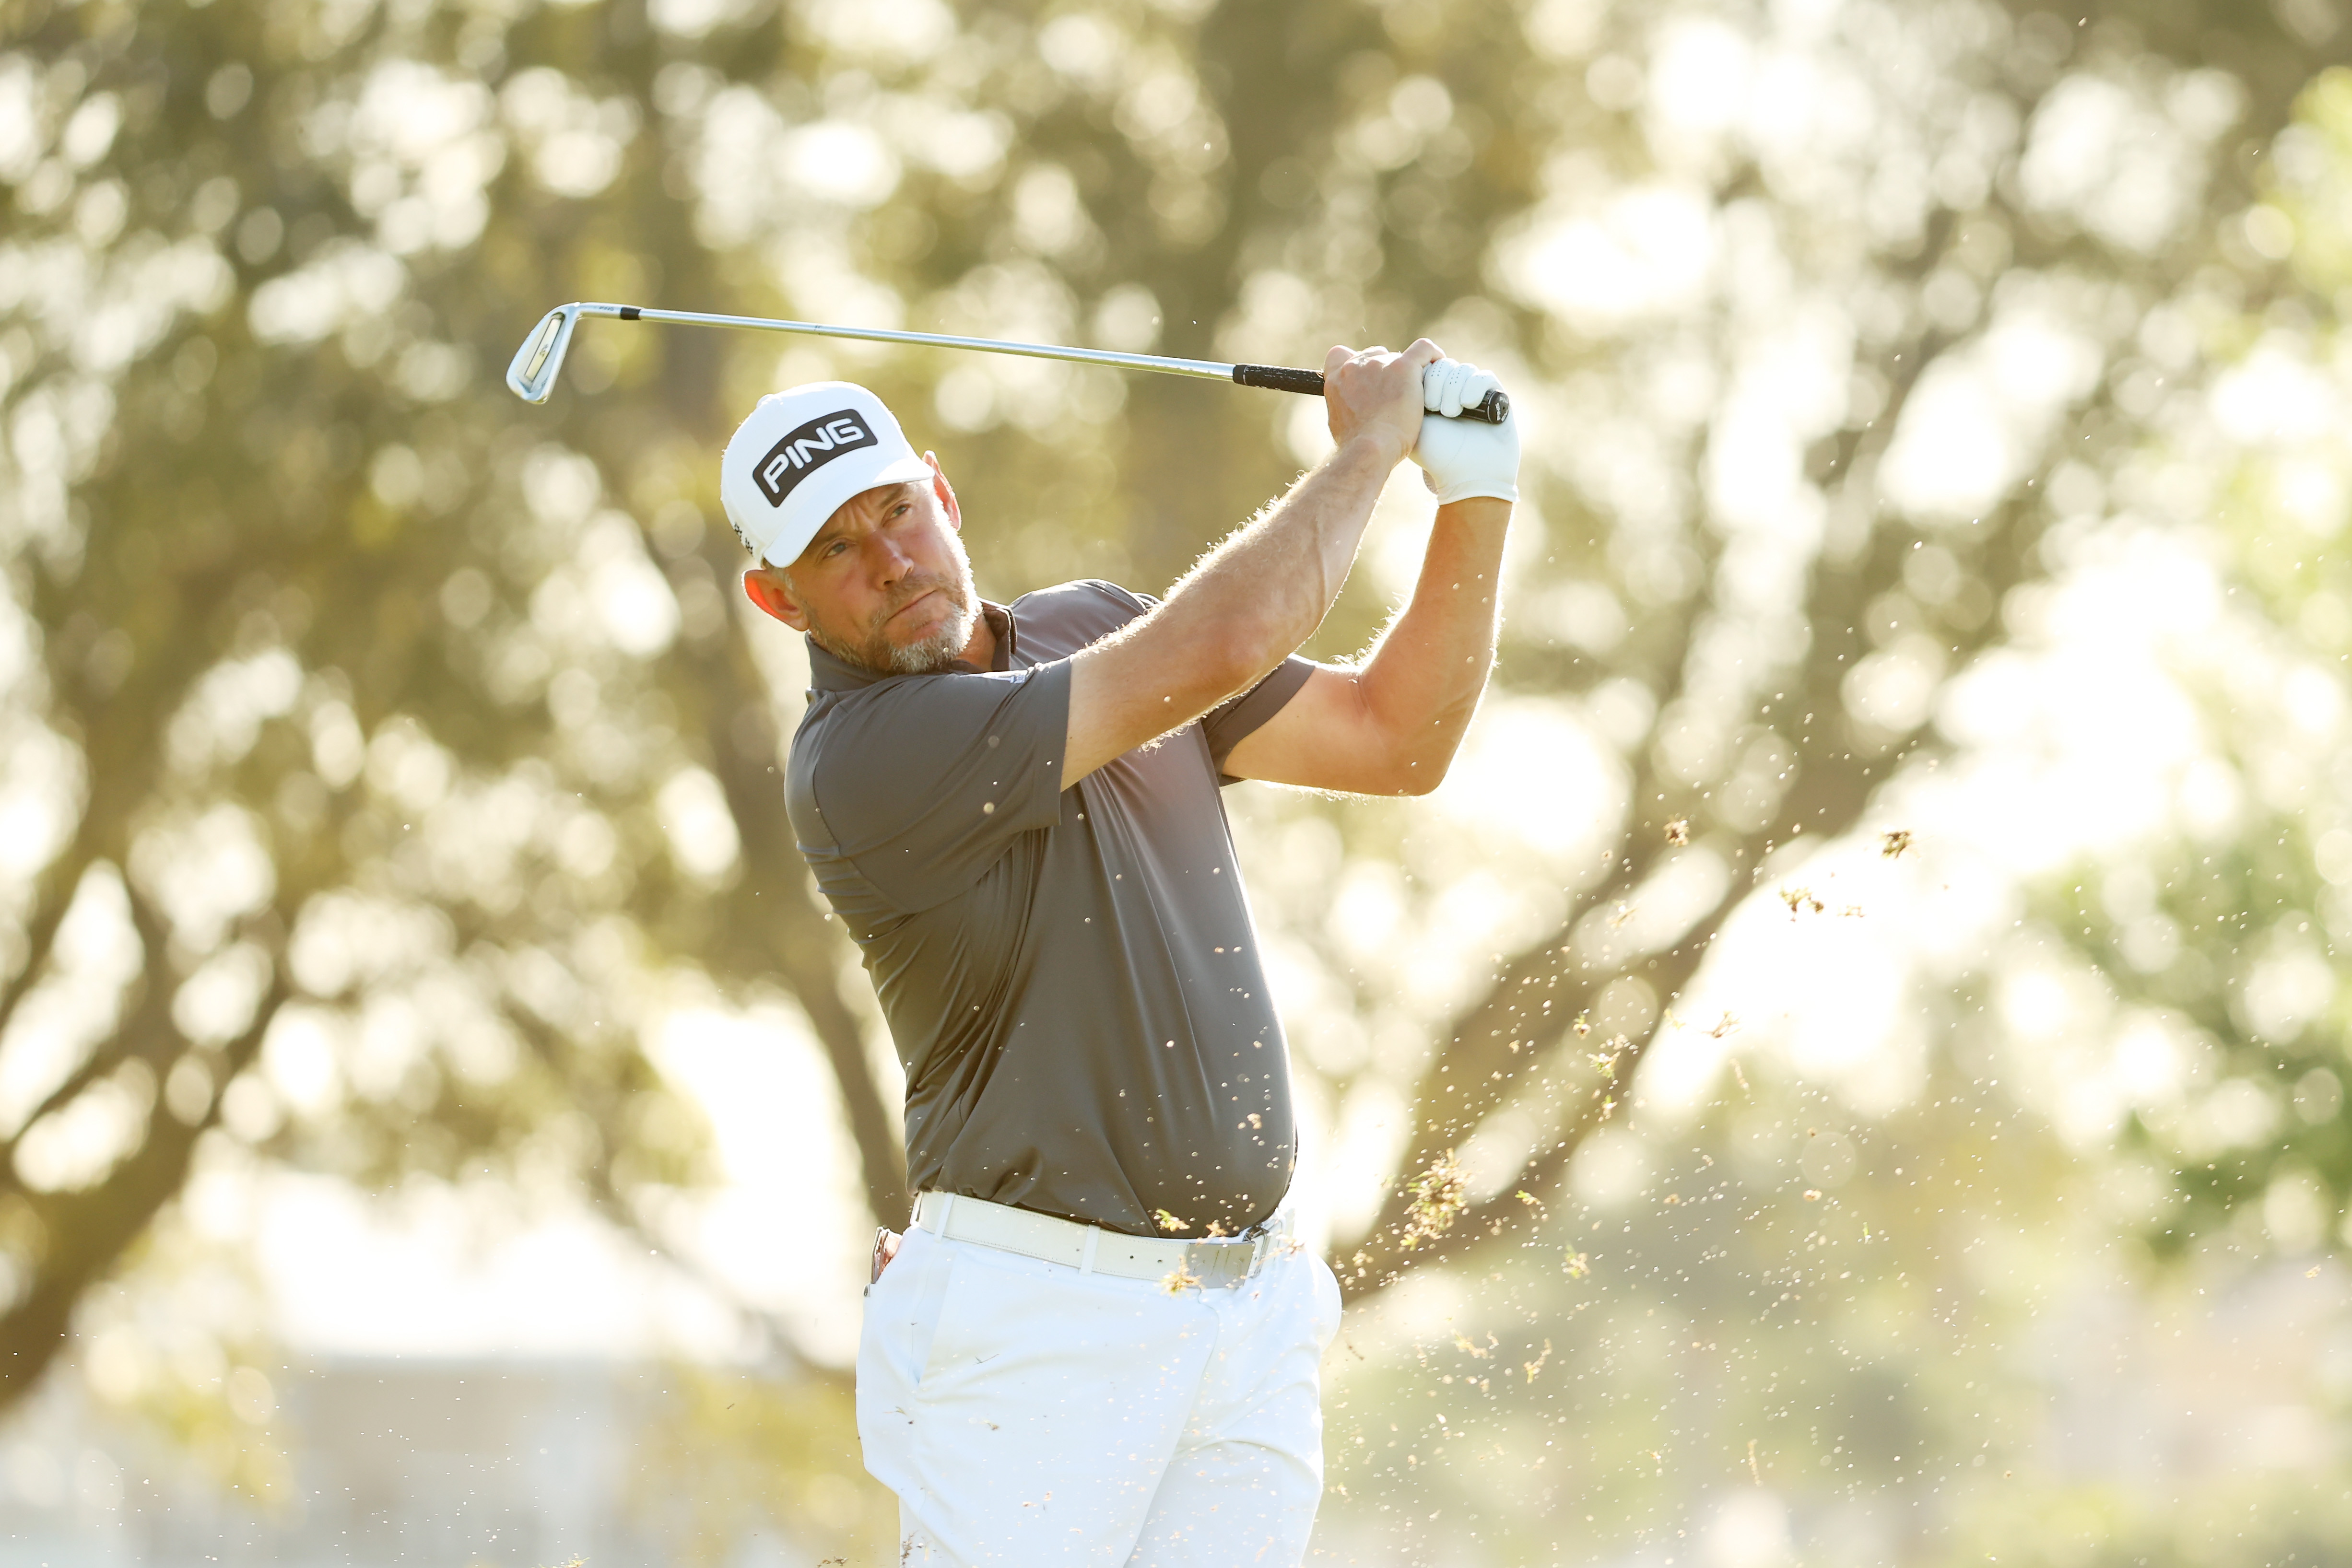 Lee Westwood plays a shot prior to The Honda Classic in 2021